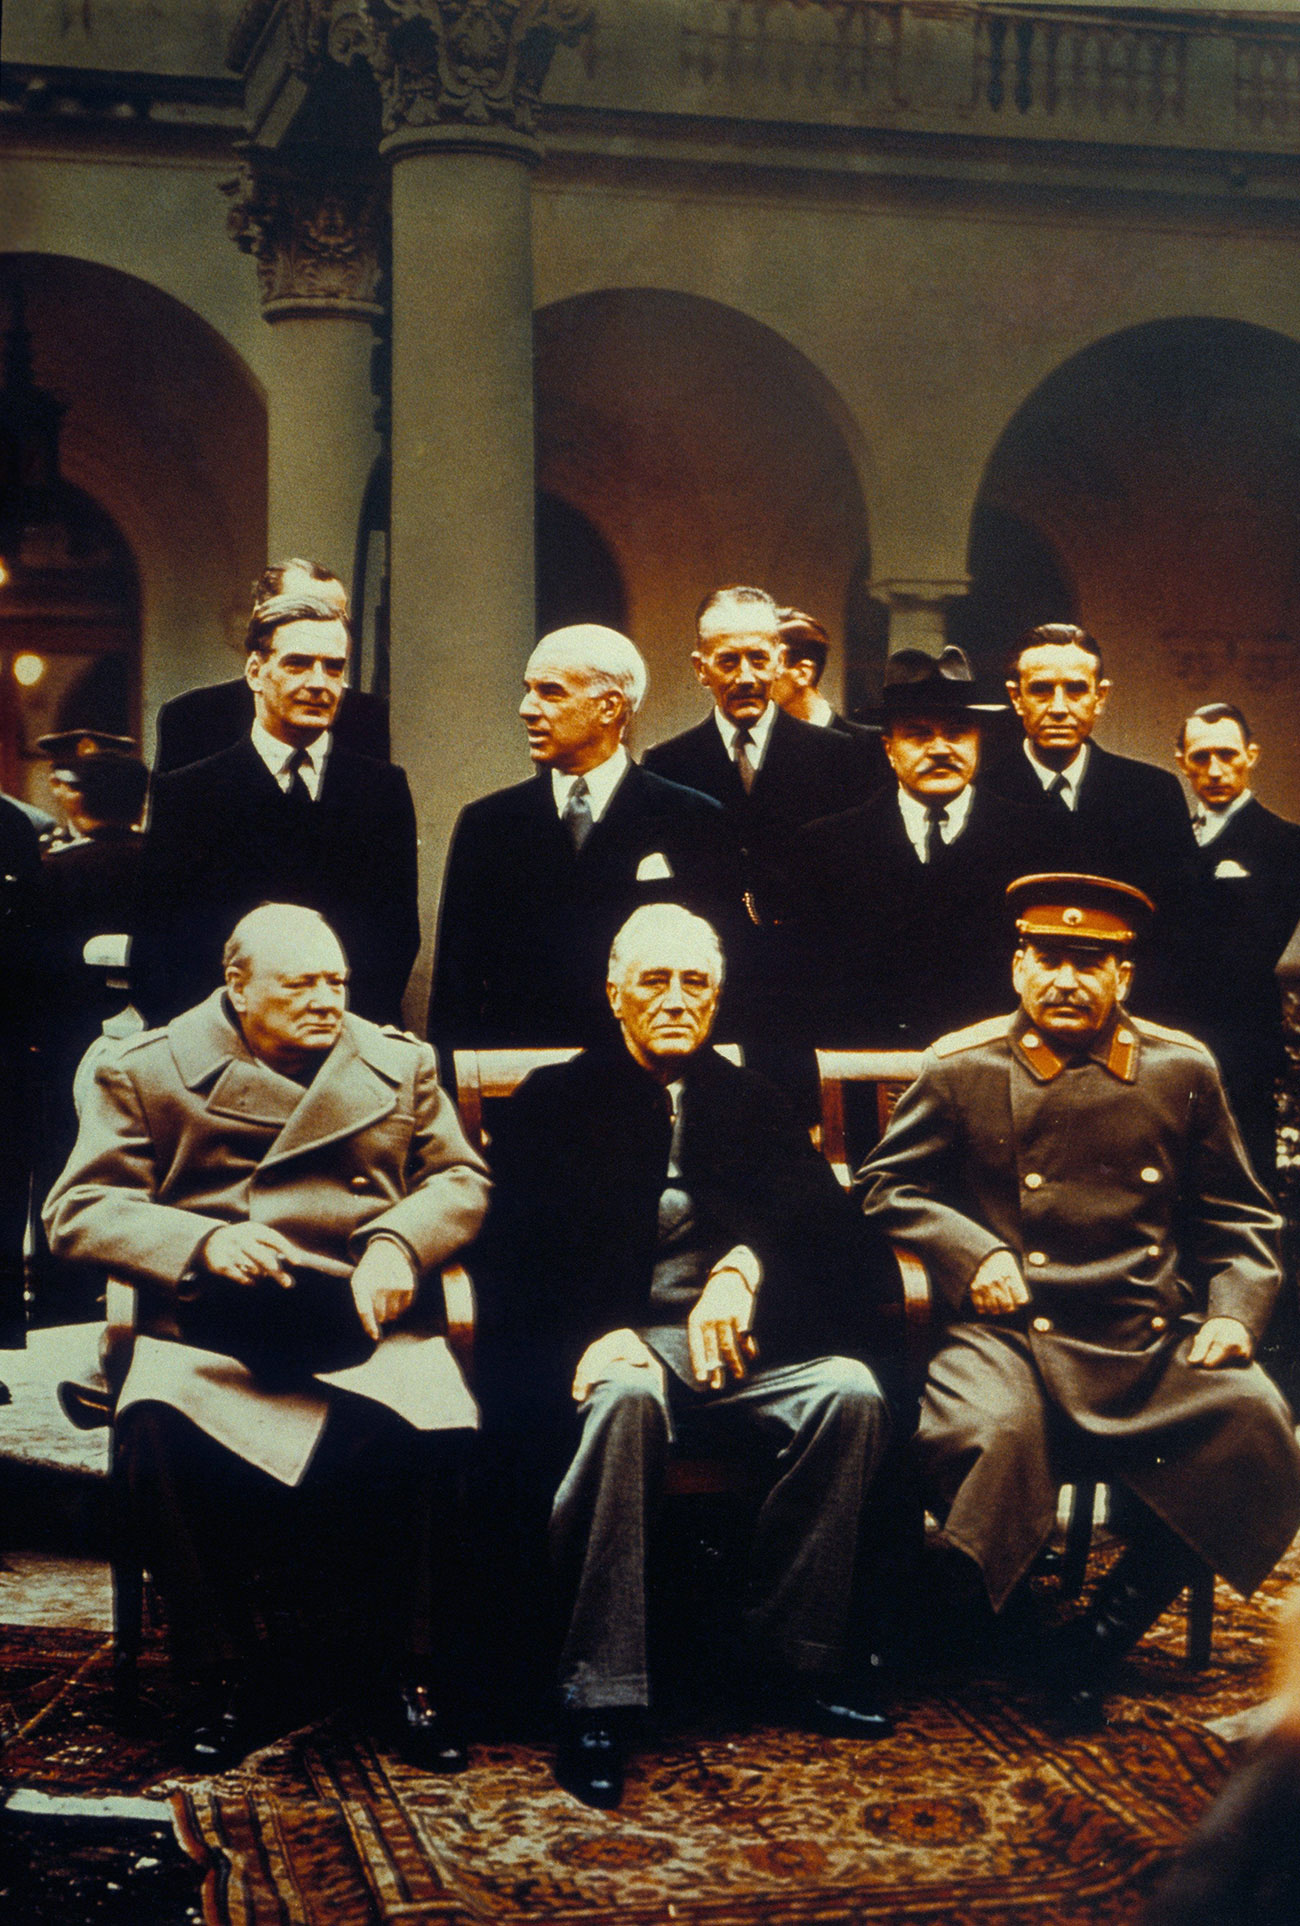 During the Yalta conference, U.S. President Franklin D. Roosevelt and his delegation were given 43 rooms in the palace during the conference. Source: Imago/Global Look Press